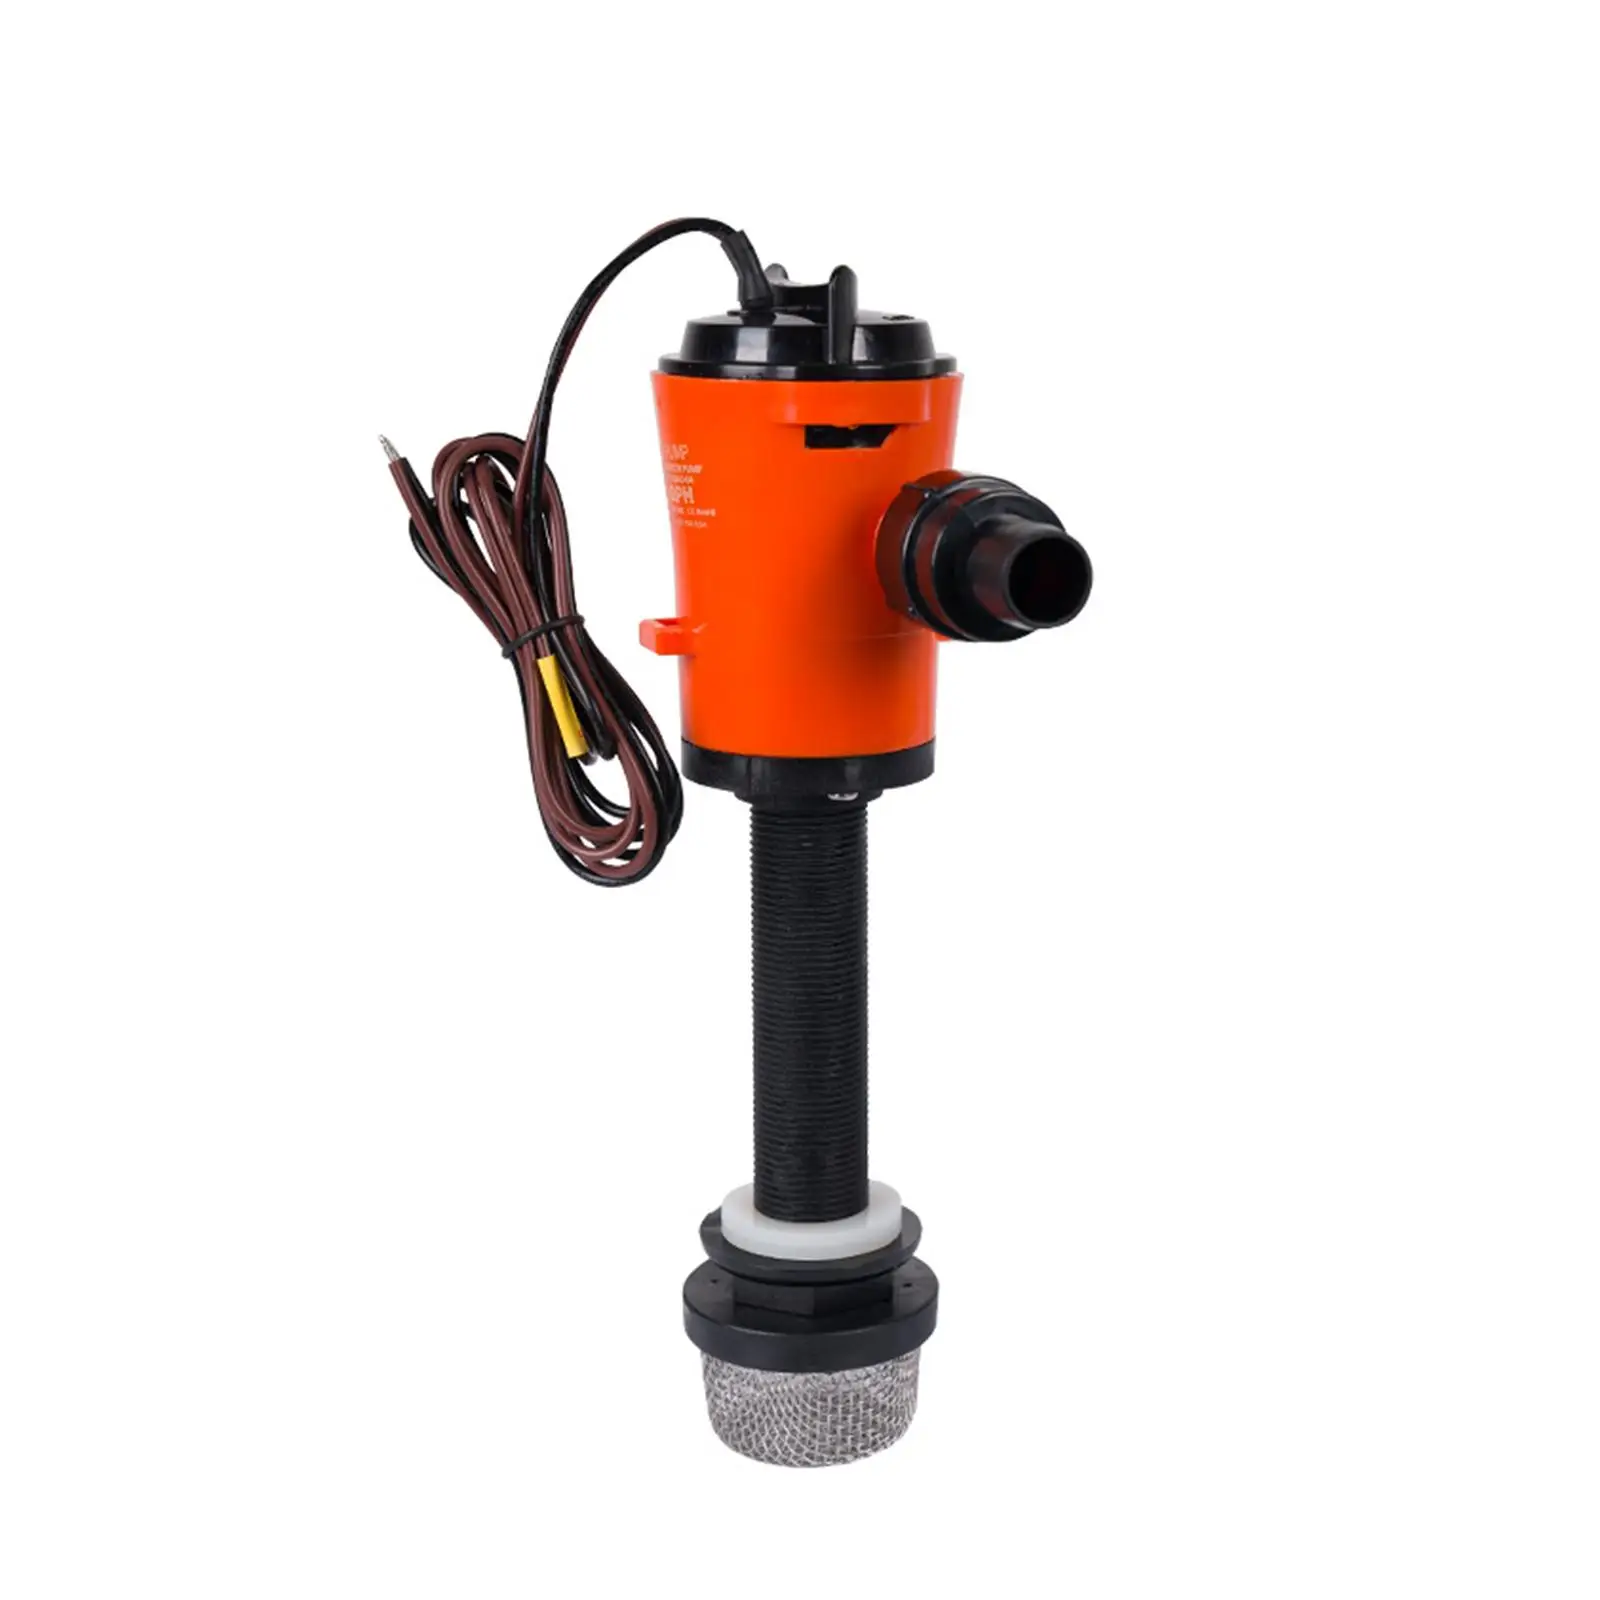 Aerator Livewell Pump Assembly with Filter Spare Parts Replaces Accessory Easy to Install Professional Removable Boat Bilge Pump